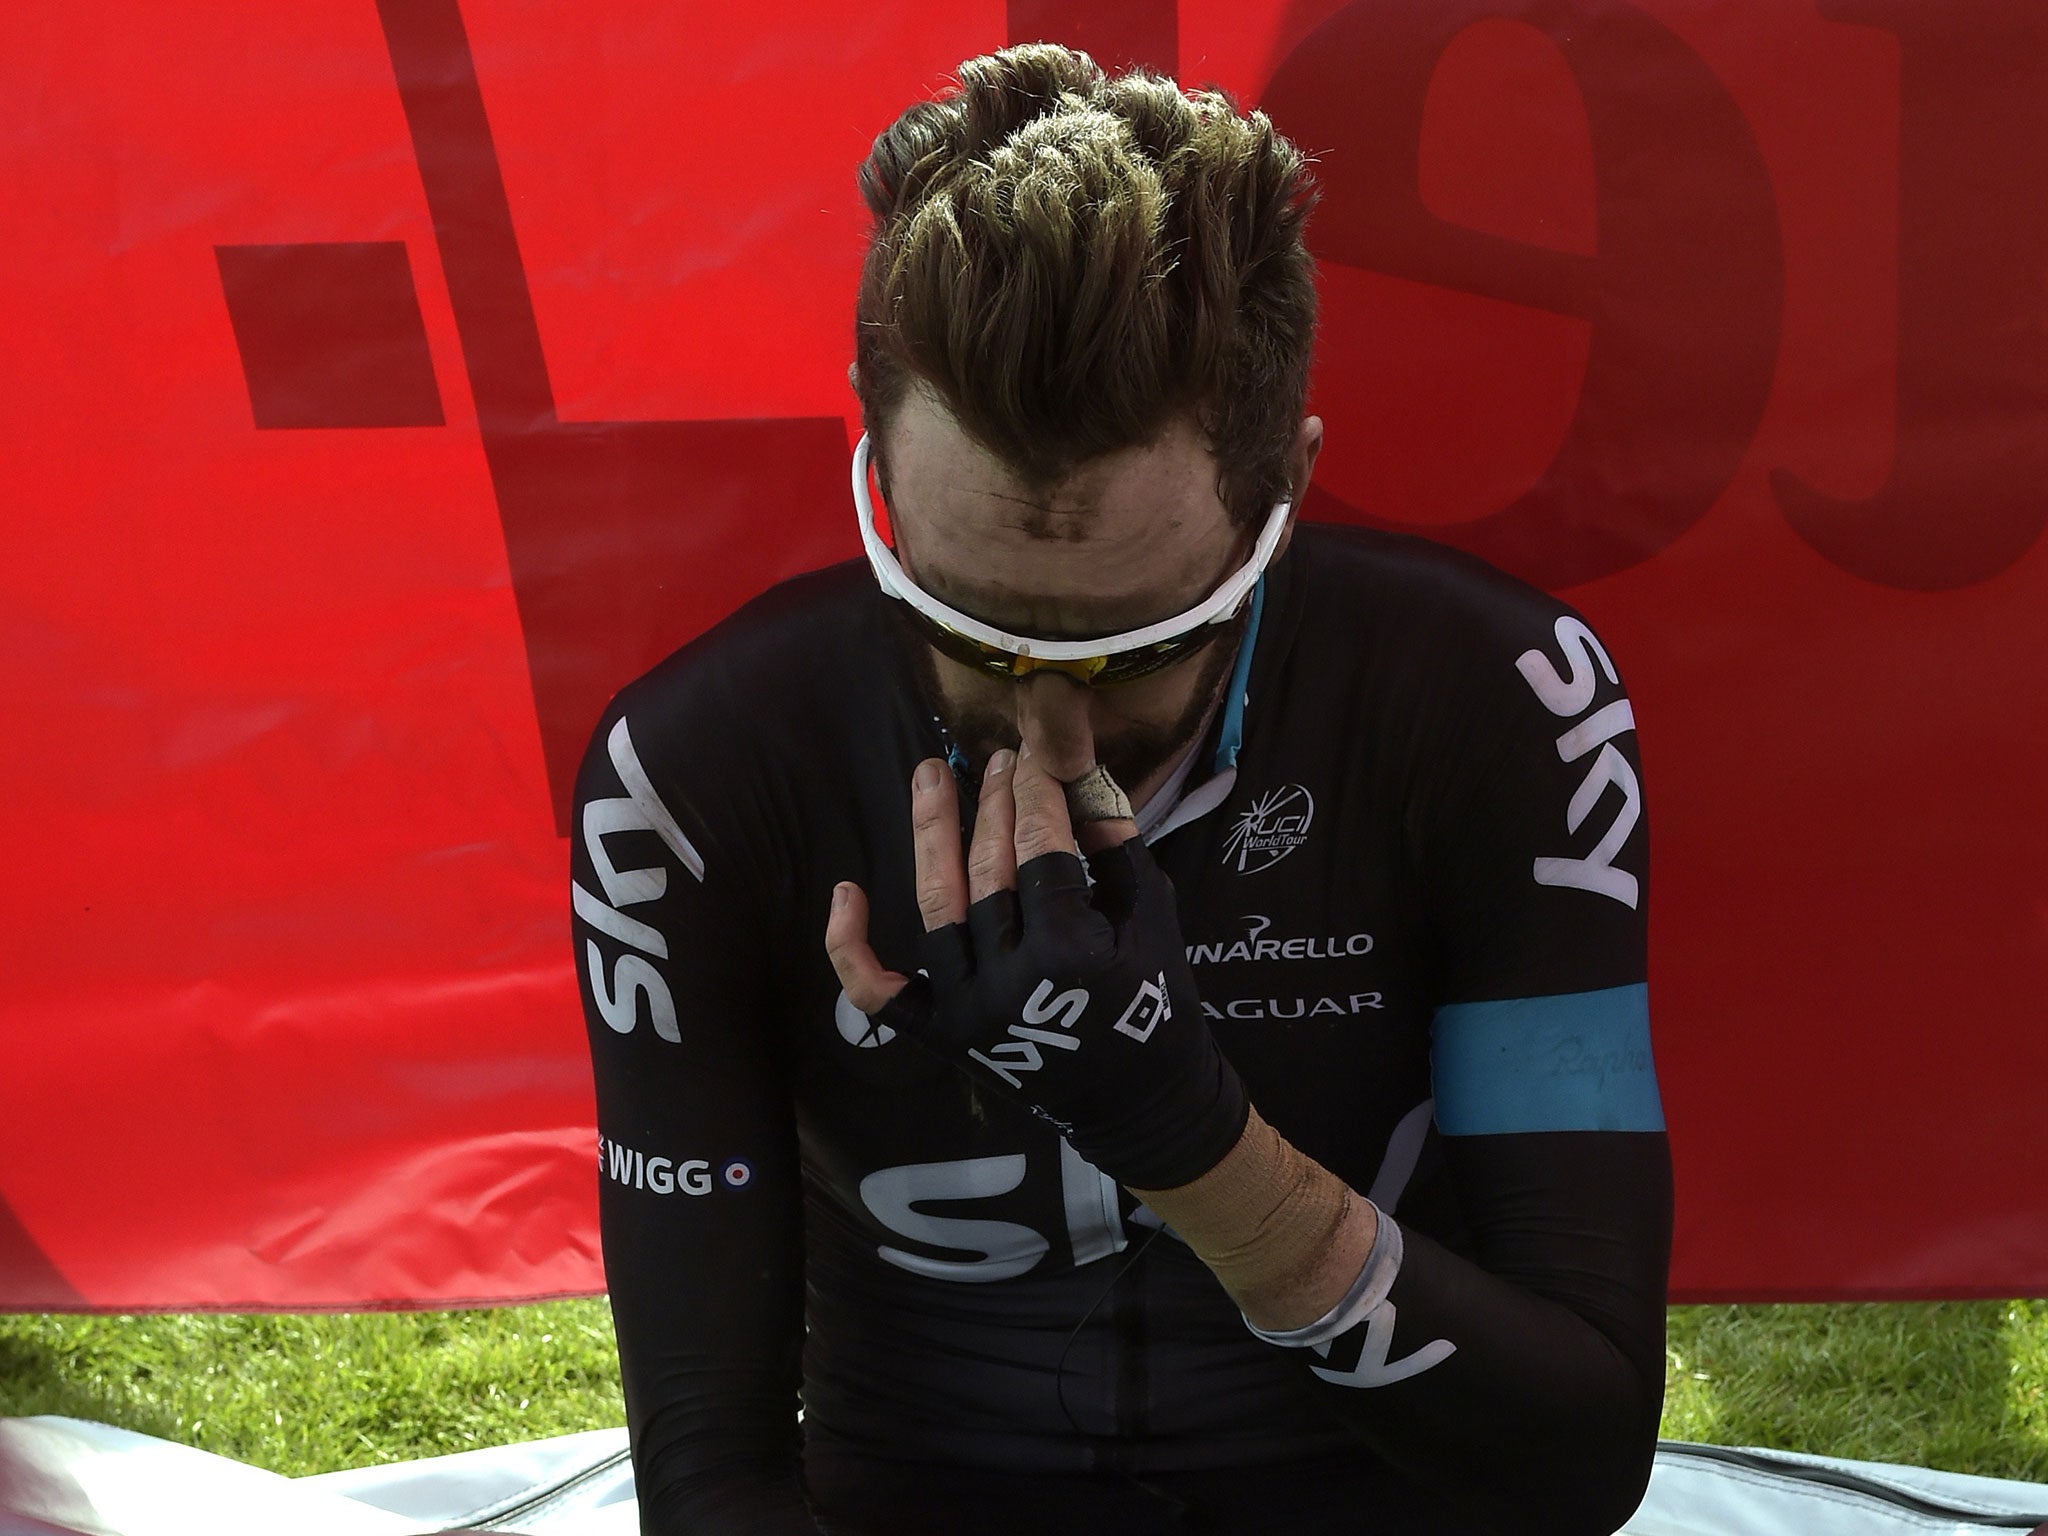 Bradley Wiggins is dejected after finishing 18th at Paris-Roubaix